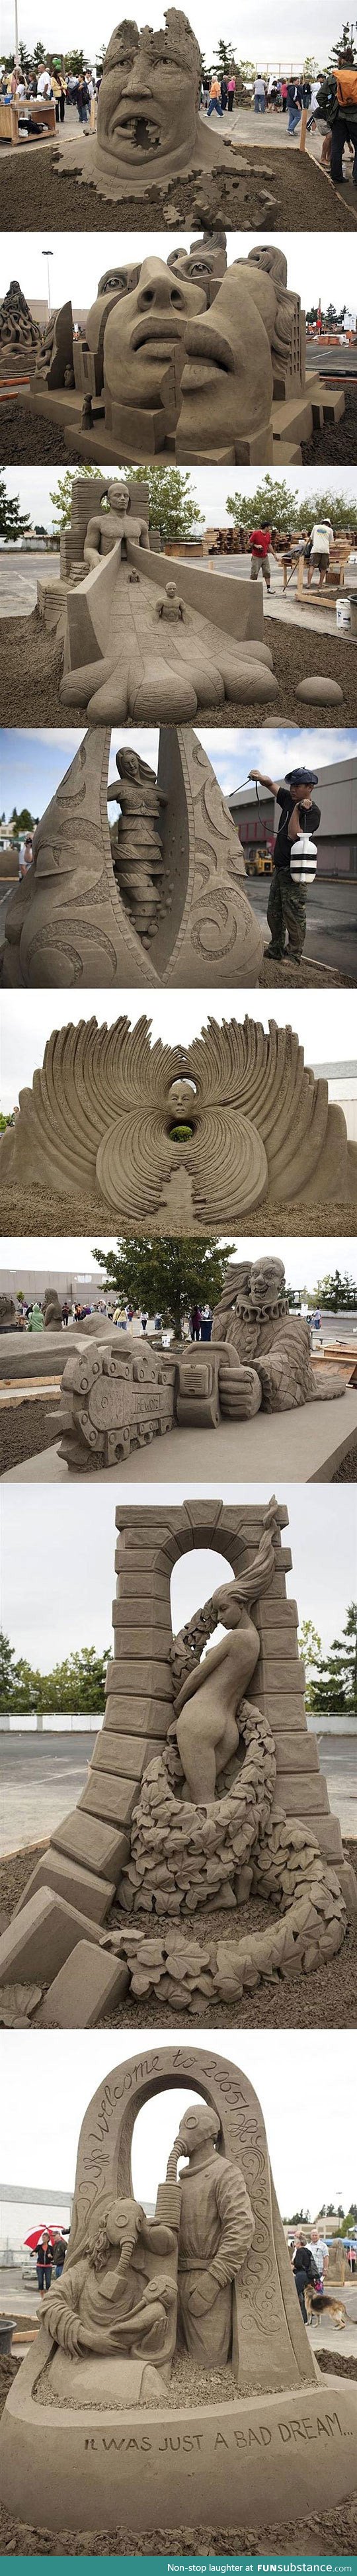 Sand sculpting at its best